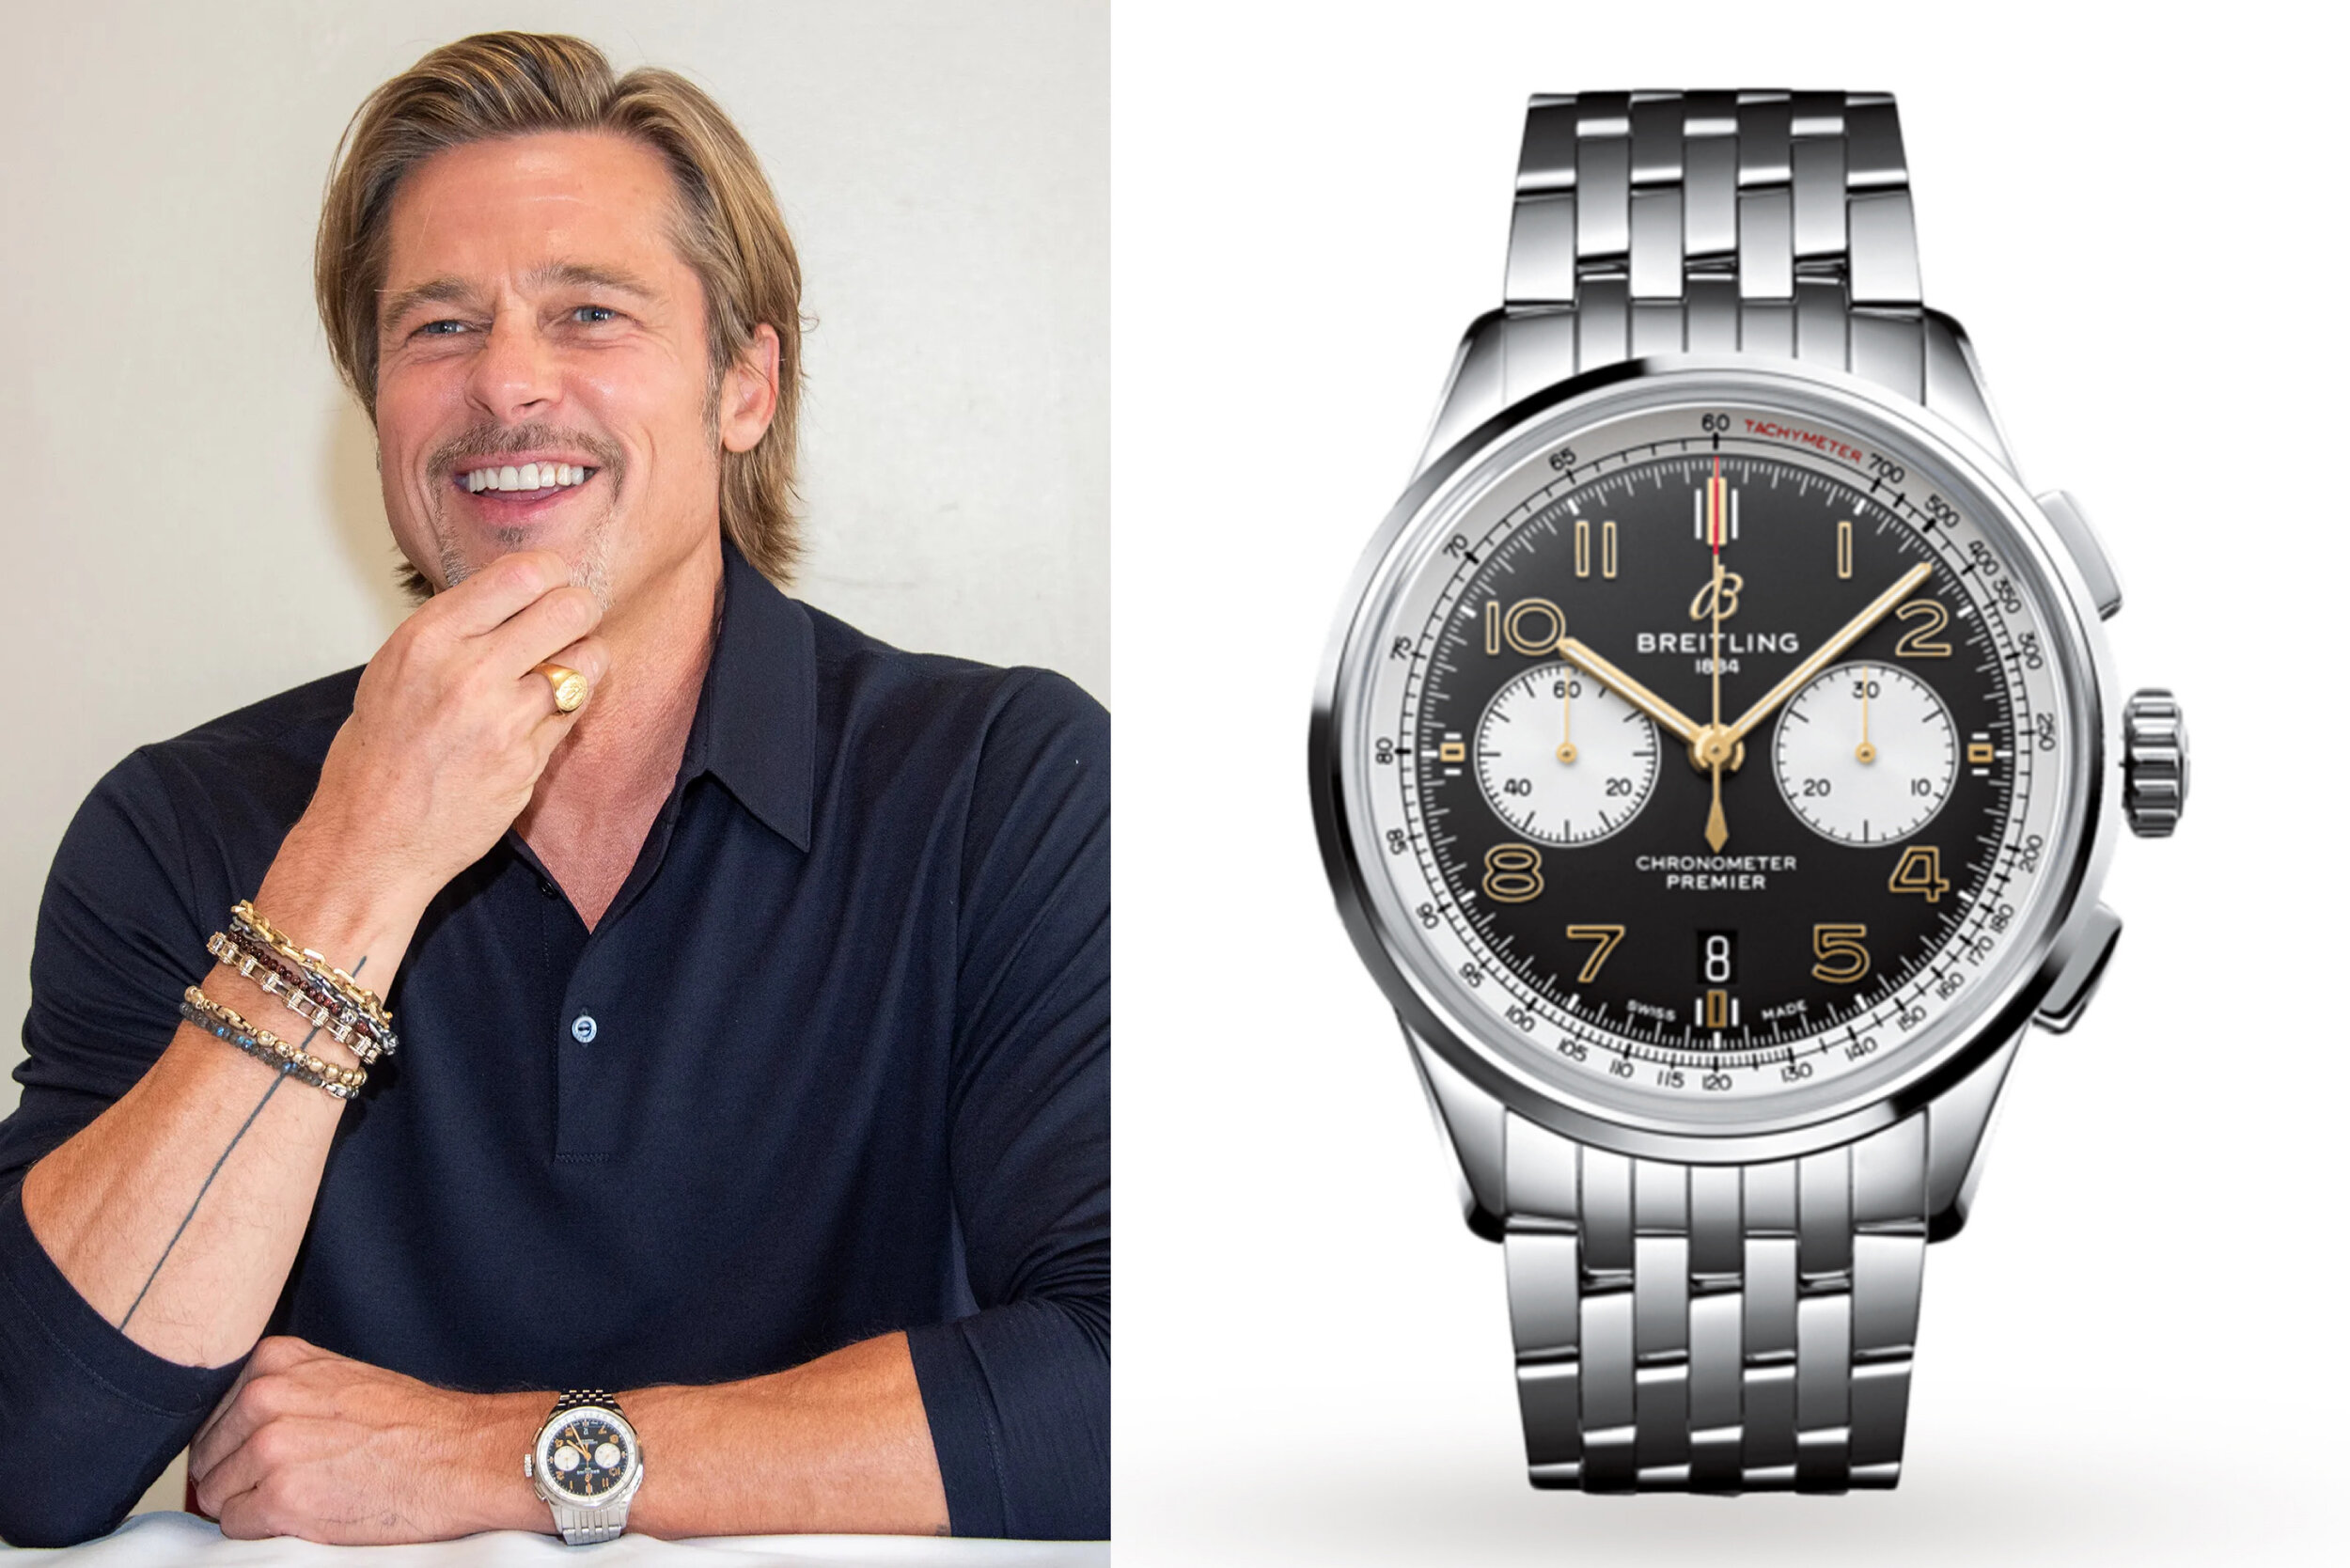 Gosling, Pitt, Nadal and More - Watch Brands and Their Celebrity